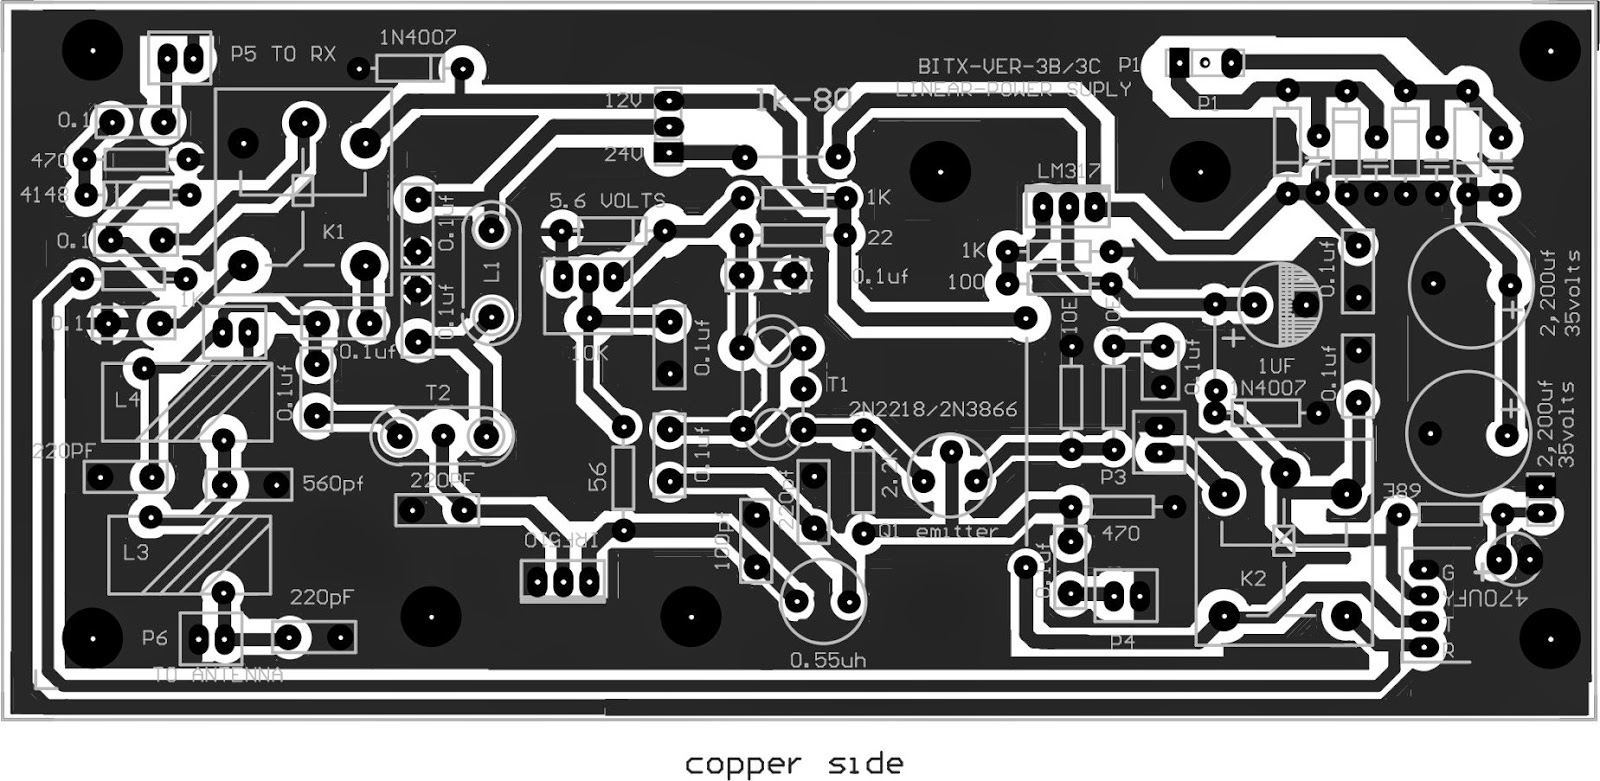 New PCB Bitx3B 3C Exciter And PA